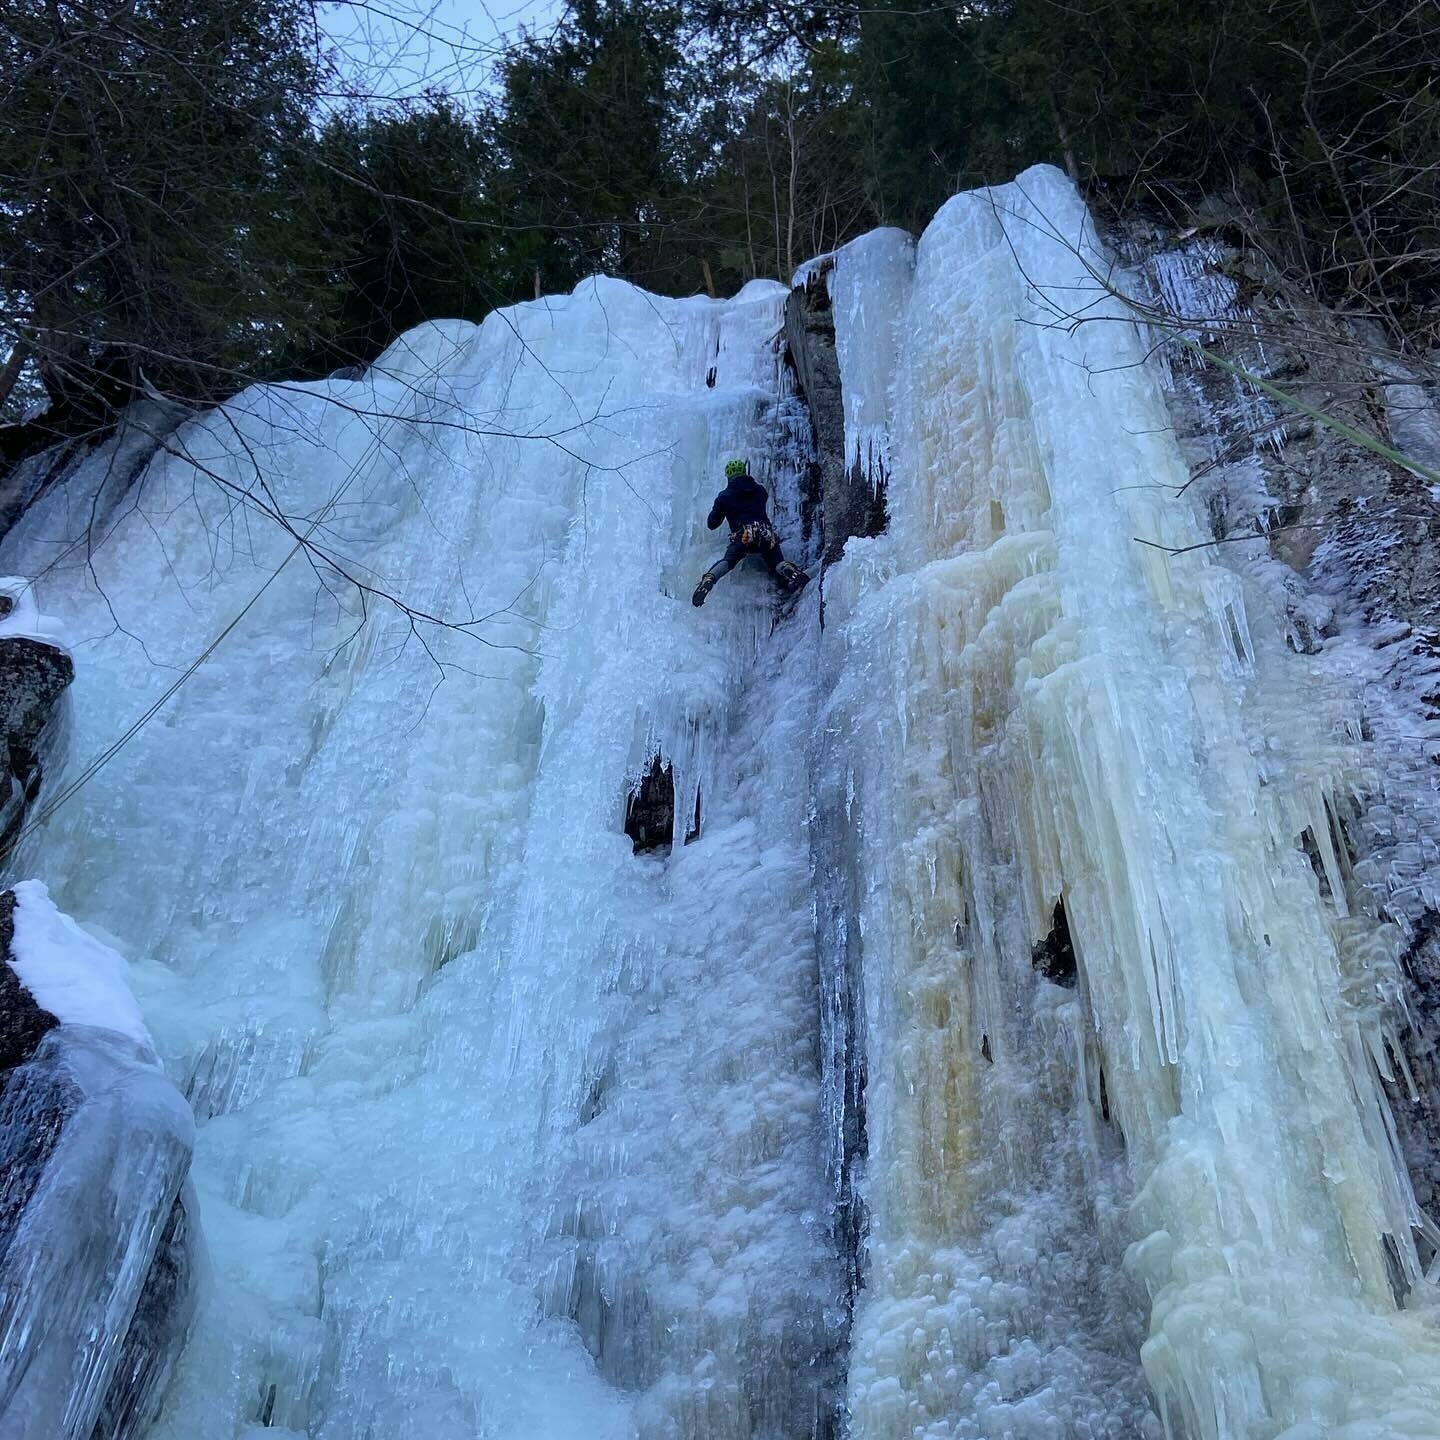 A climber ascends a vertical, frozen waterfall with ice axes, surrounded by snow-covered rocks and trees.